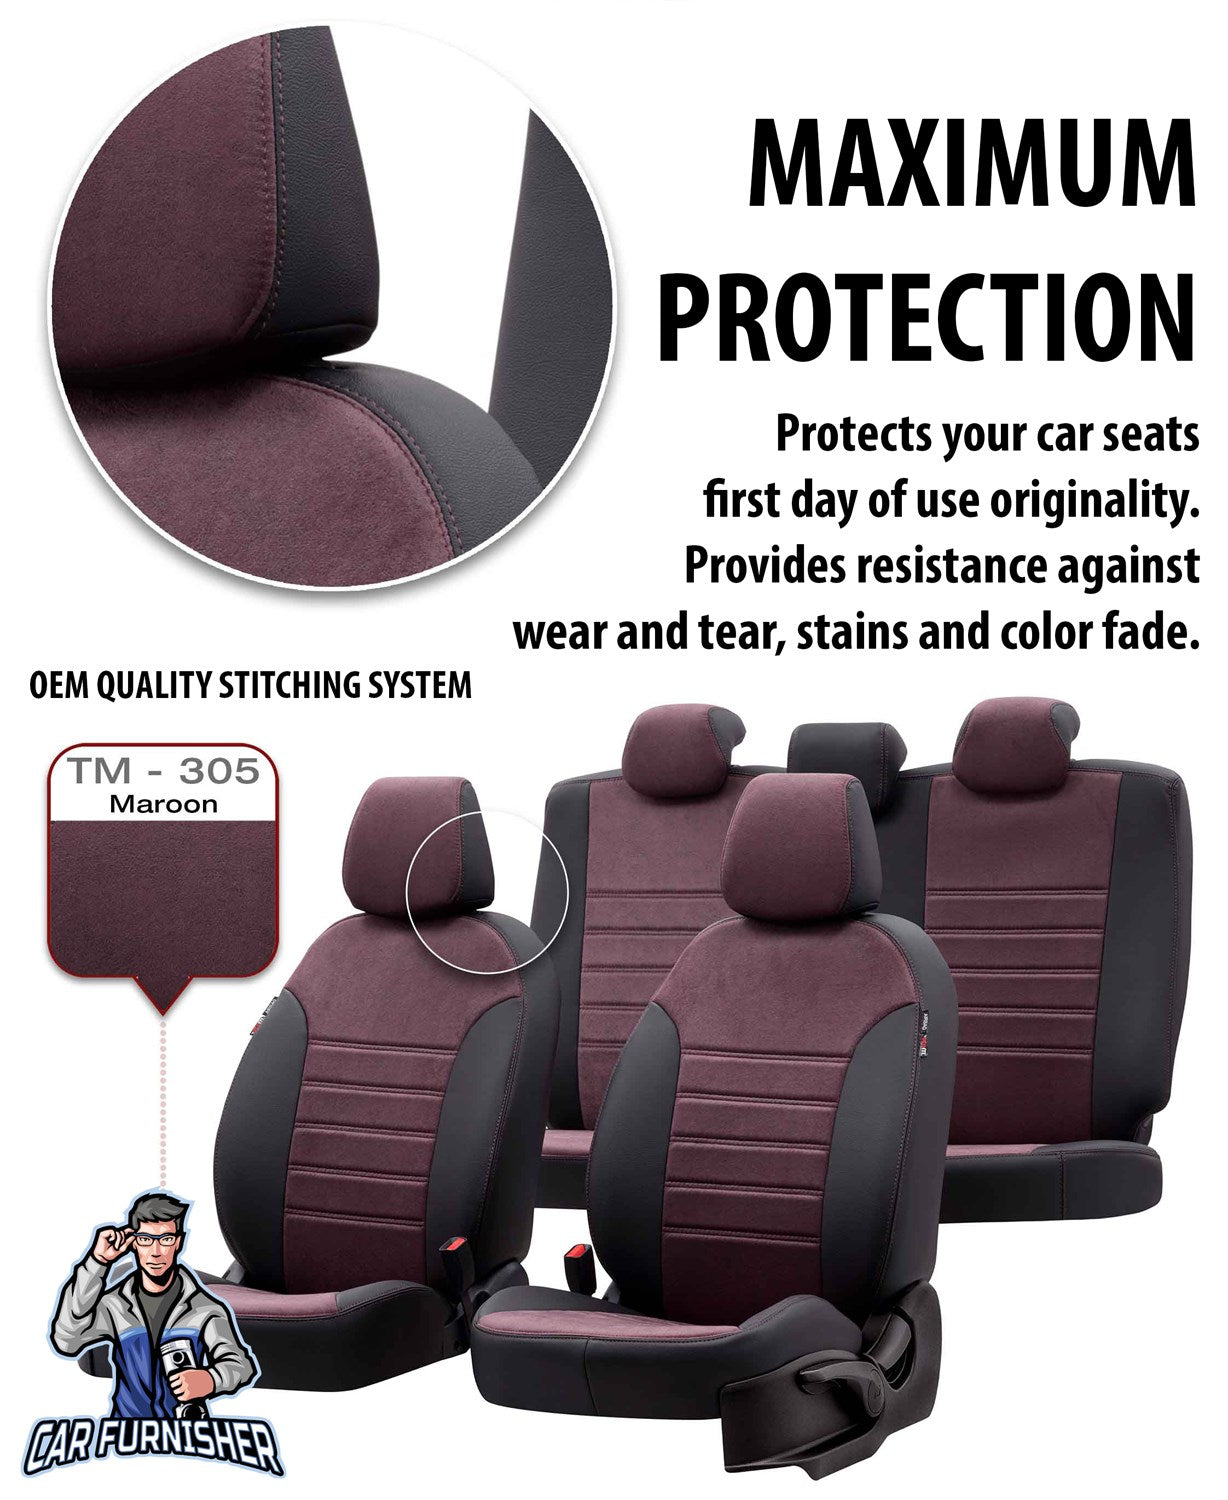 Volvo S90 Seat Cover Milano Suede Design Burgundy Leather & Suede Fabric